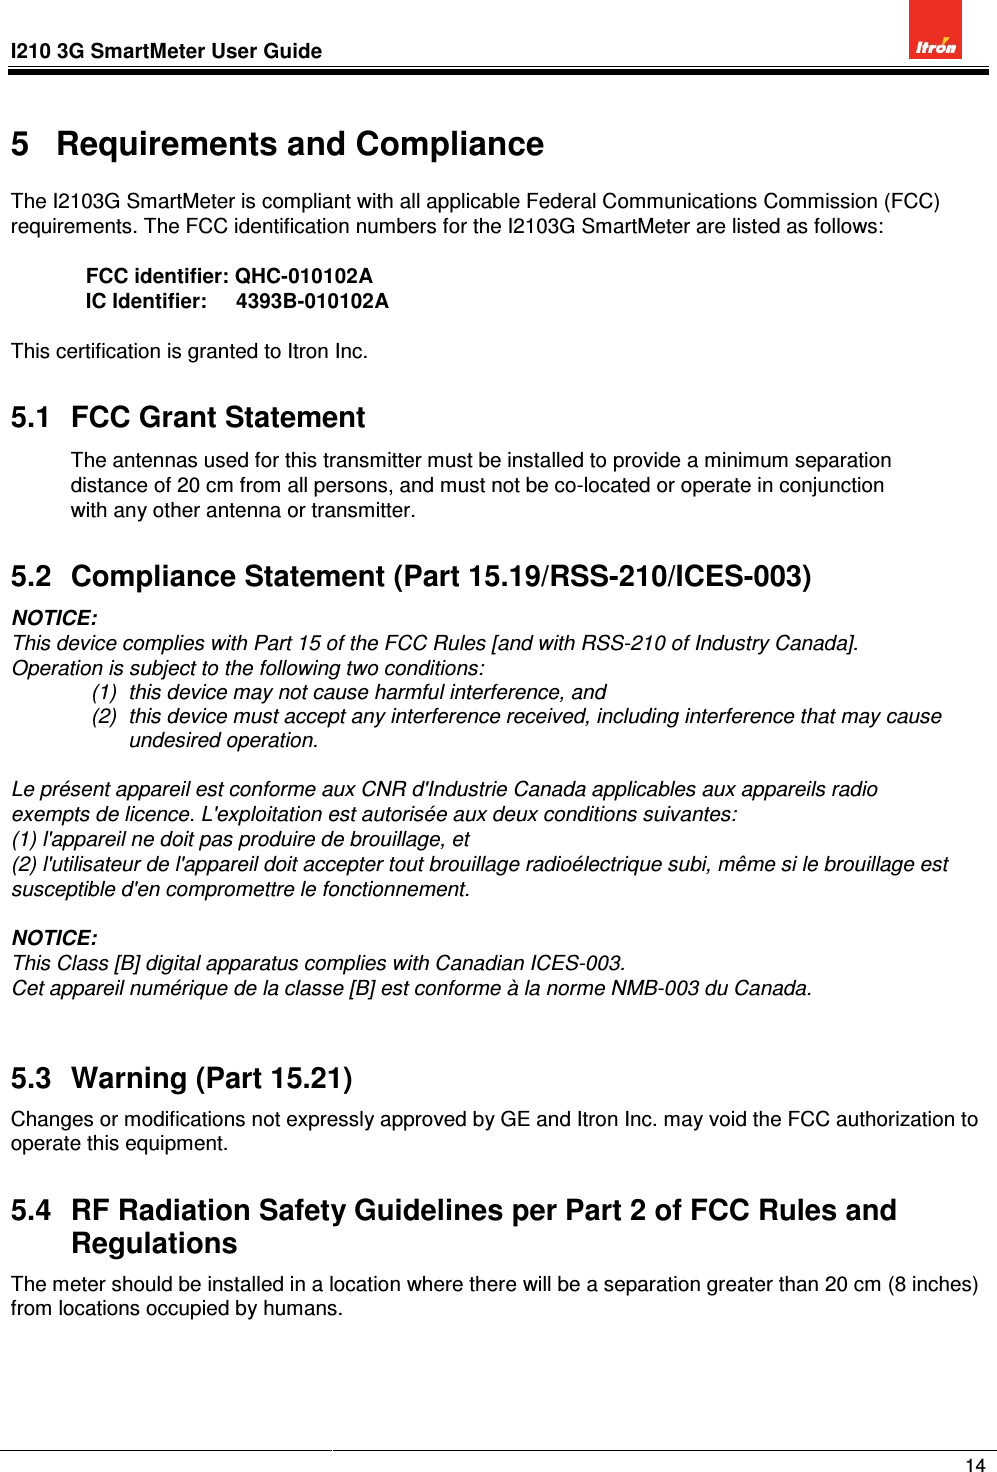 I210 3G SmartMeter User Guide              14  5  Requirements and Compliance The I2103G SmartMeter is compliant with all applicable Federal Communications Commission (FCC) requirements. The FCC identification numbers for the I2103G SmartMeter are listed as follows:  FCC identifier: QHC-010102A IC Identifier:     4393B-010102A  This certification is granted to Itron Inc. 5.1  FCC Grant Statement The antennas used for this transmitter must be installed to provide a minimum separation distance of 20 cm from all persons, and must not be co-located or operate in conjunction with any other antenna or transmitter.  5.2  Compliance Statement (Part 15.19/RSS-210/ICES-003) NOTICE: This device complies with Part 15 of the FCC Rules [and with RSS-210 of Industry Canada]. Operation is subject to the following two conditions: (1)  this device may not cause harmful interference, and  (2)  this device must accept any interference received, including interference that may cause undesired operation.  Le présent appareil est conforme aux CNR d&apos;Industrie Canada applicables aux appareils radio exempts de licence. L&apos;exploitation est autorisée aux deux conditions suivantes: (1) l&apos;appareil ne doit pas produire de brouillage, et  (2) l&apos;utilisateur de l&apos;appareil doit accepter tout brouillage radioélectrique subi, même si le brouillage est susceptible d&apos;en compromettre le fonctionnement.  NOTICE:  This Class [B] digital apparatus complies with Canadian ICES-003. Cet appareil numérique de la classe [B] est conforme à la norme NMB-003 du Canada.  5.3  Warning (Part 15.21) Changes or modifications not expressly approved by GE and Itron Inc. may void the FCC authorization to operate this equipment. 5.4  RF Radiation Safety Guidelines per Part 2 of FCC Rules and Regulations The meter should be installed in a location where there will be a separation greater than 20 cm (8 inches) from locations occupied by humans.    